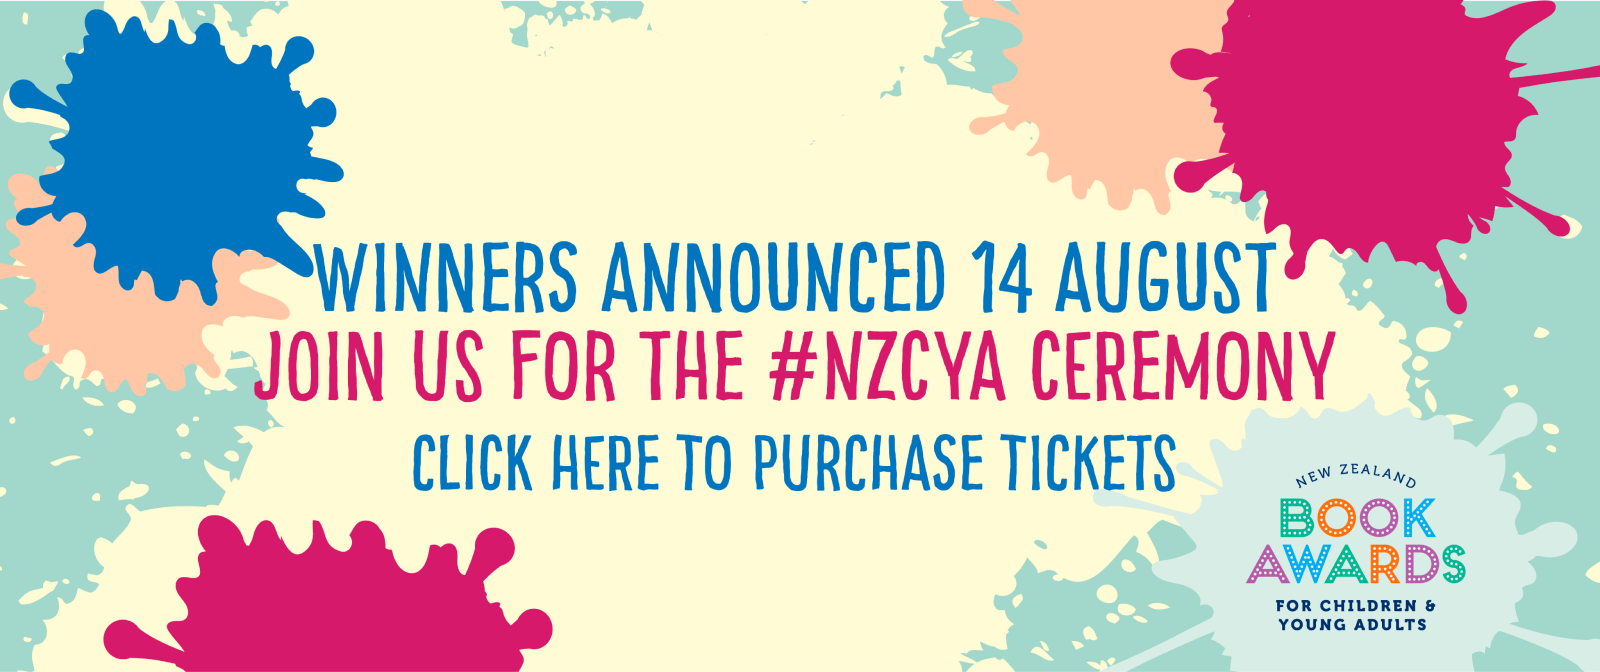 New Zealand Book Awards For Children And Young Adults - Winners announced 14 August. Join us for the #NZCYA ceremony. Click here to purchase tickets